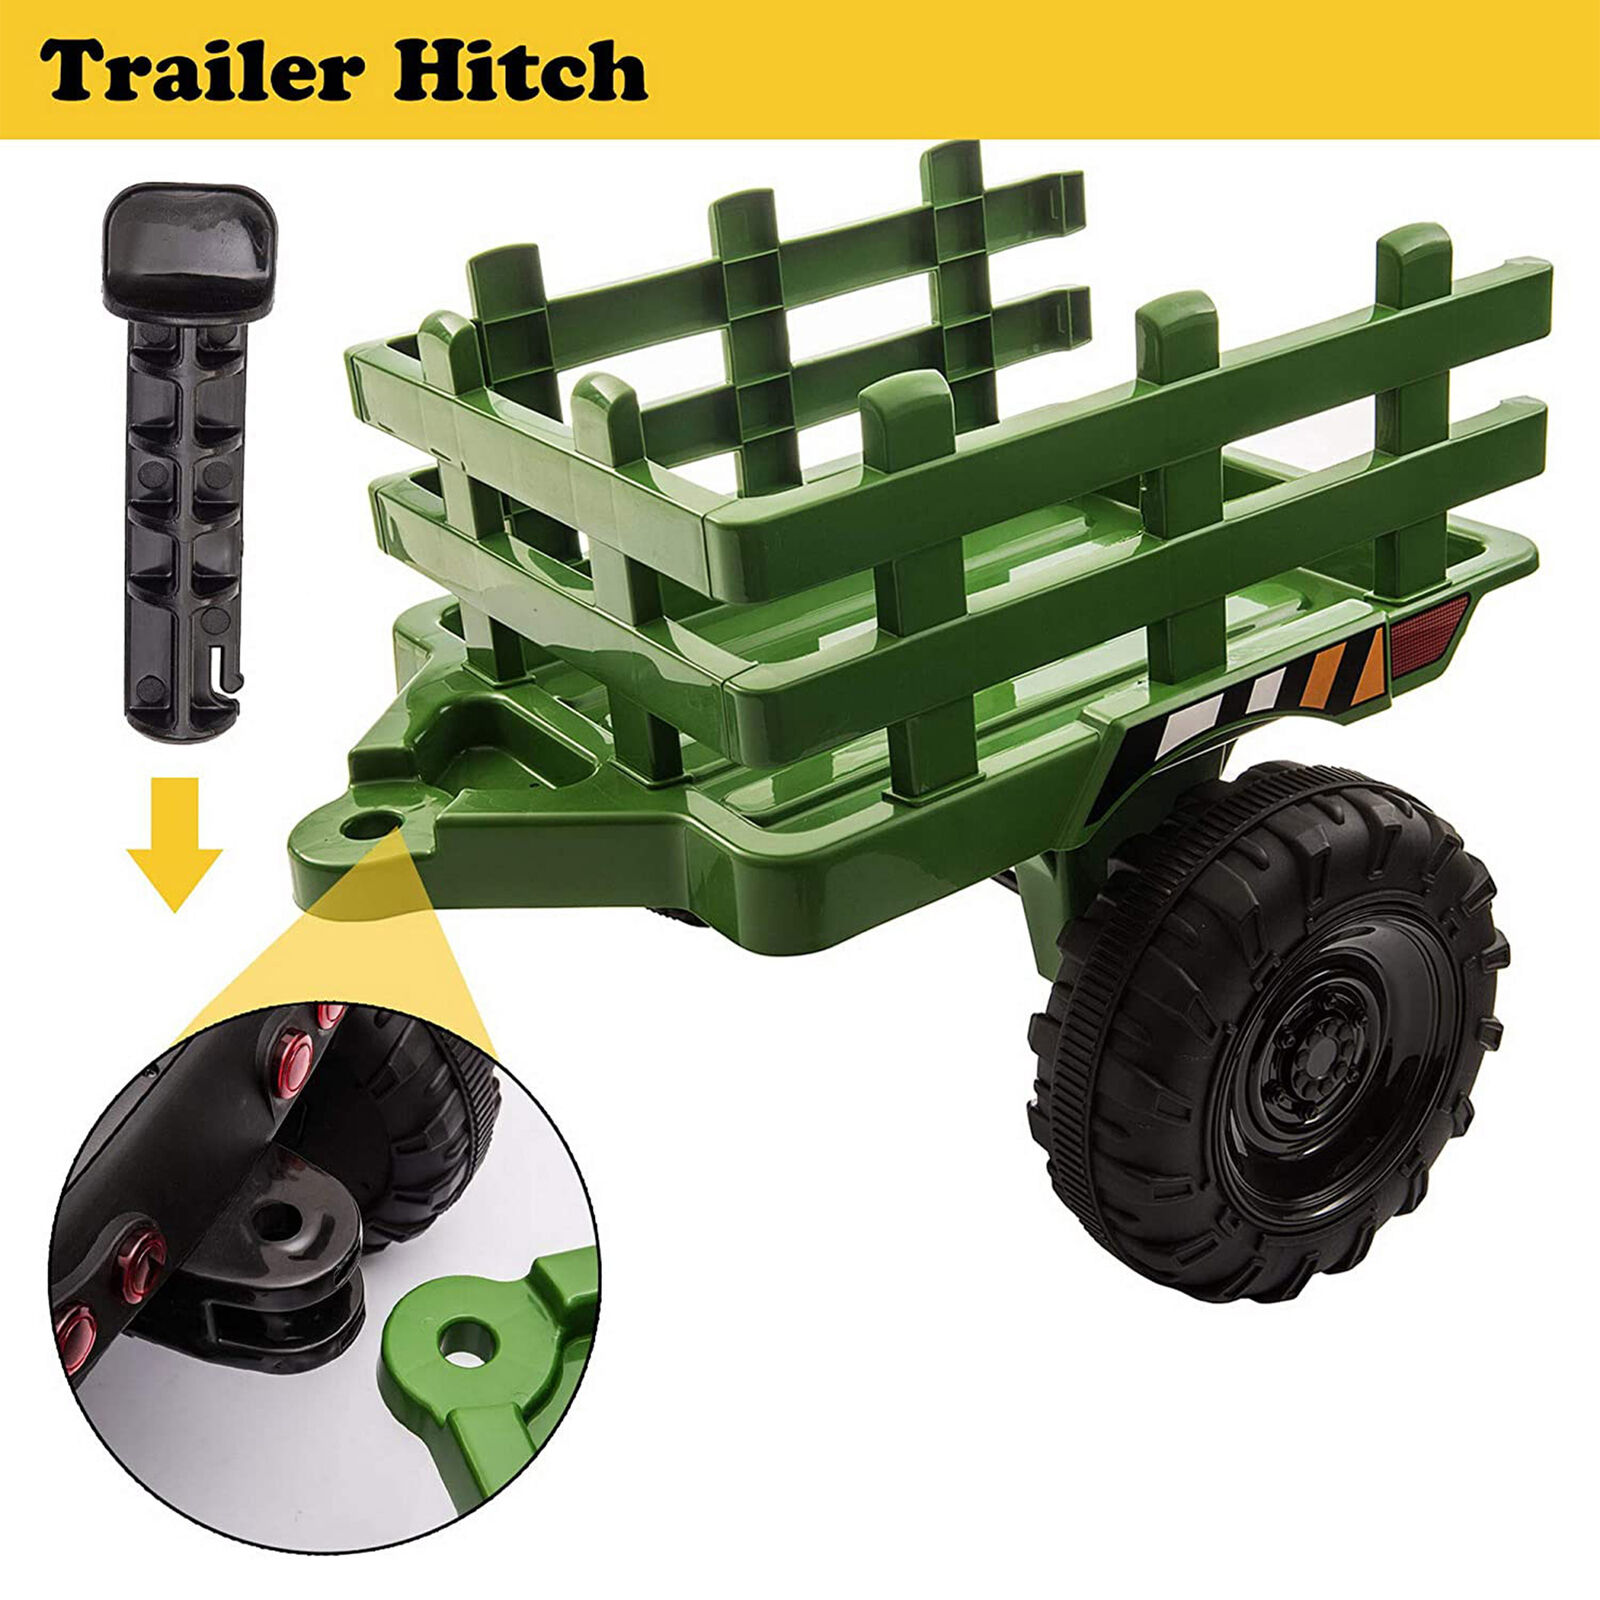 thinkstar 12 Volt Battery Operated Toy Tractor With Pull Behind Trailer, Dark Green